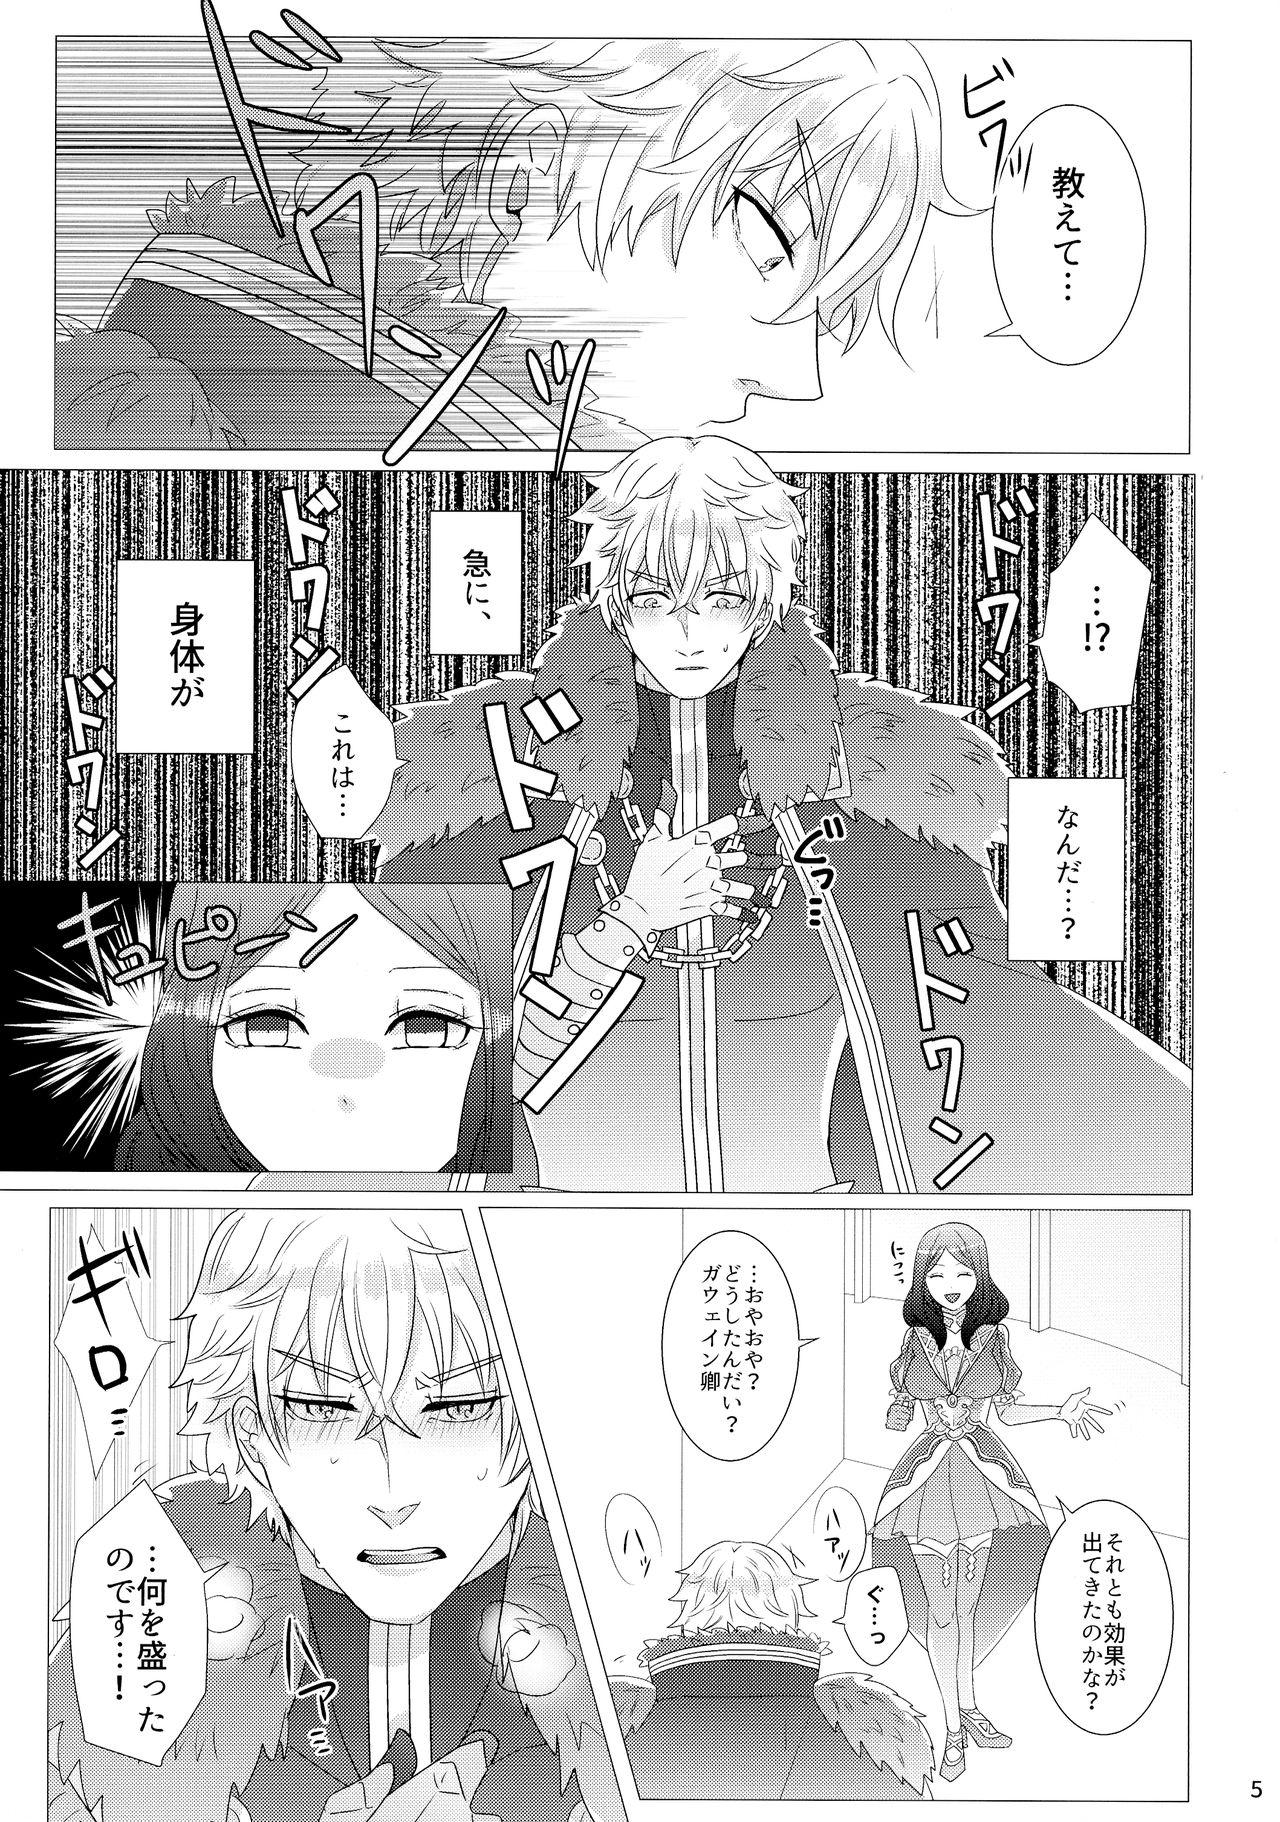 Teen Porn Takusan shichau? - Fate grand order Old And Young - Page 7